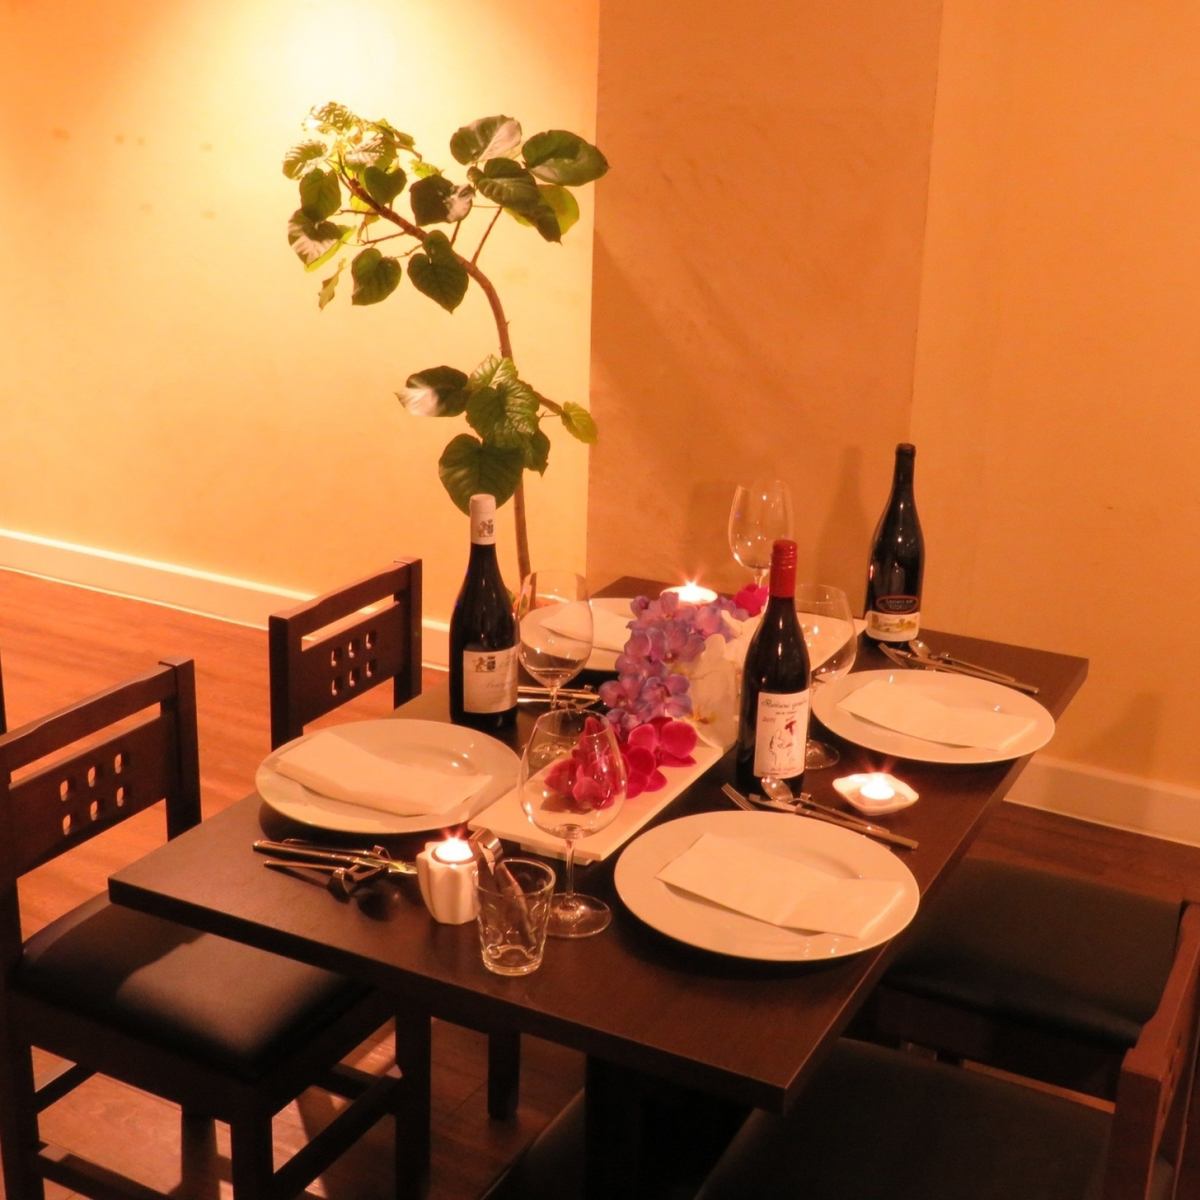 A 5-minute walk from Hiroden "Hacchobori Station"! Feel free to enjoy French cuisine in a stylish restaurant...